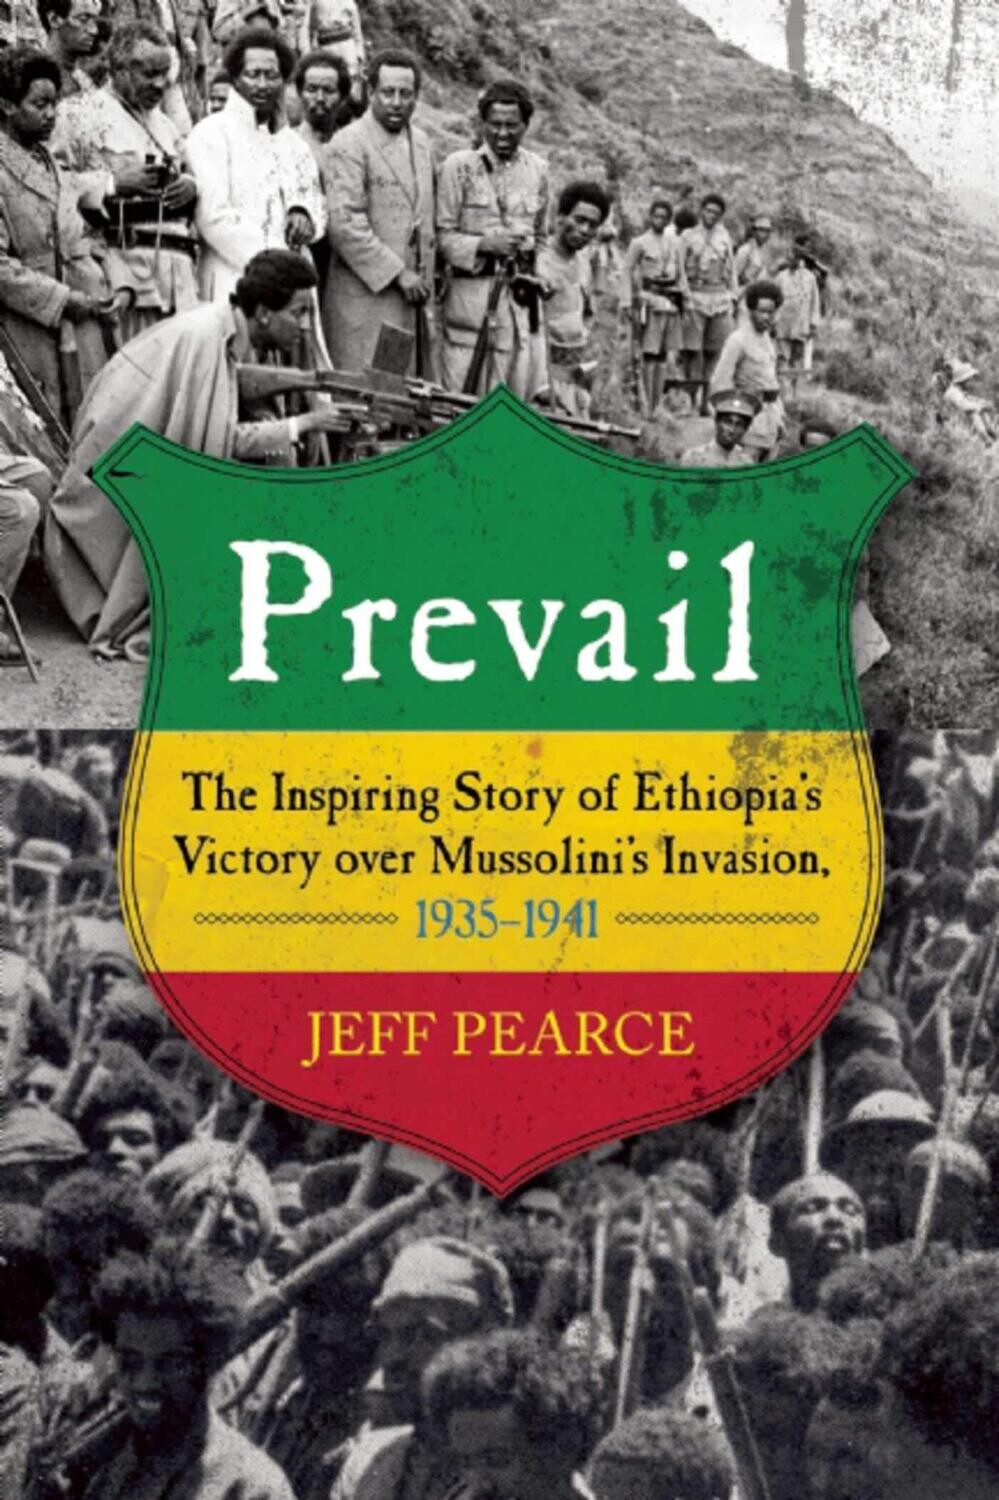 Prevail The Inspiring Story of Ethiopia's Victory over Mussolini's Invasion, 1935-?1941 Hardcover – November 18, 2014 By Jeff Pearce